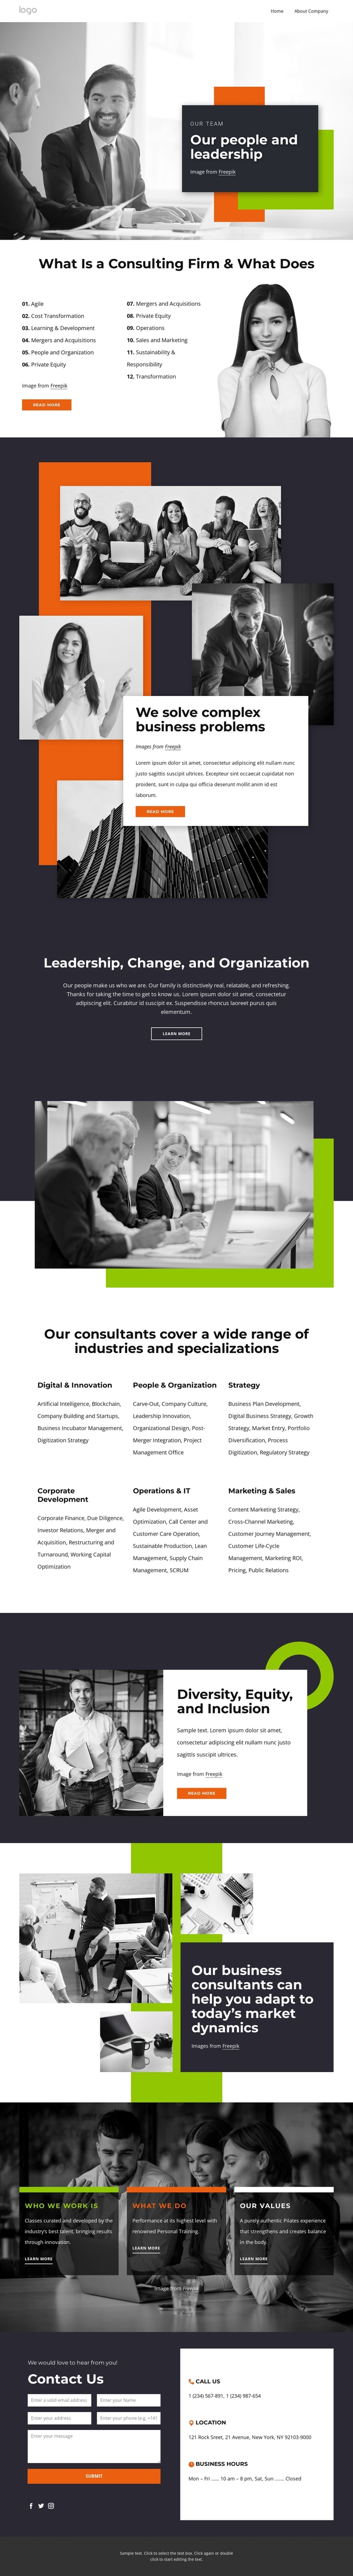 Our people, partners and leadership One Page Template